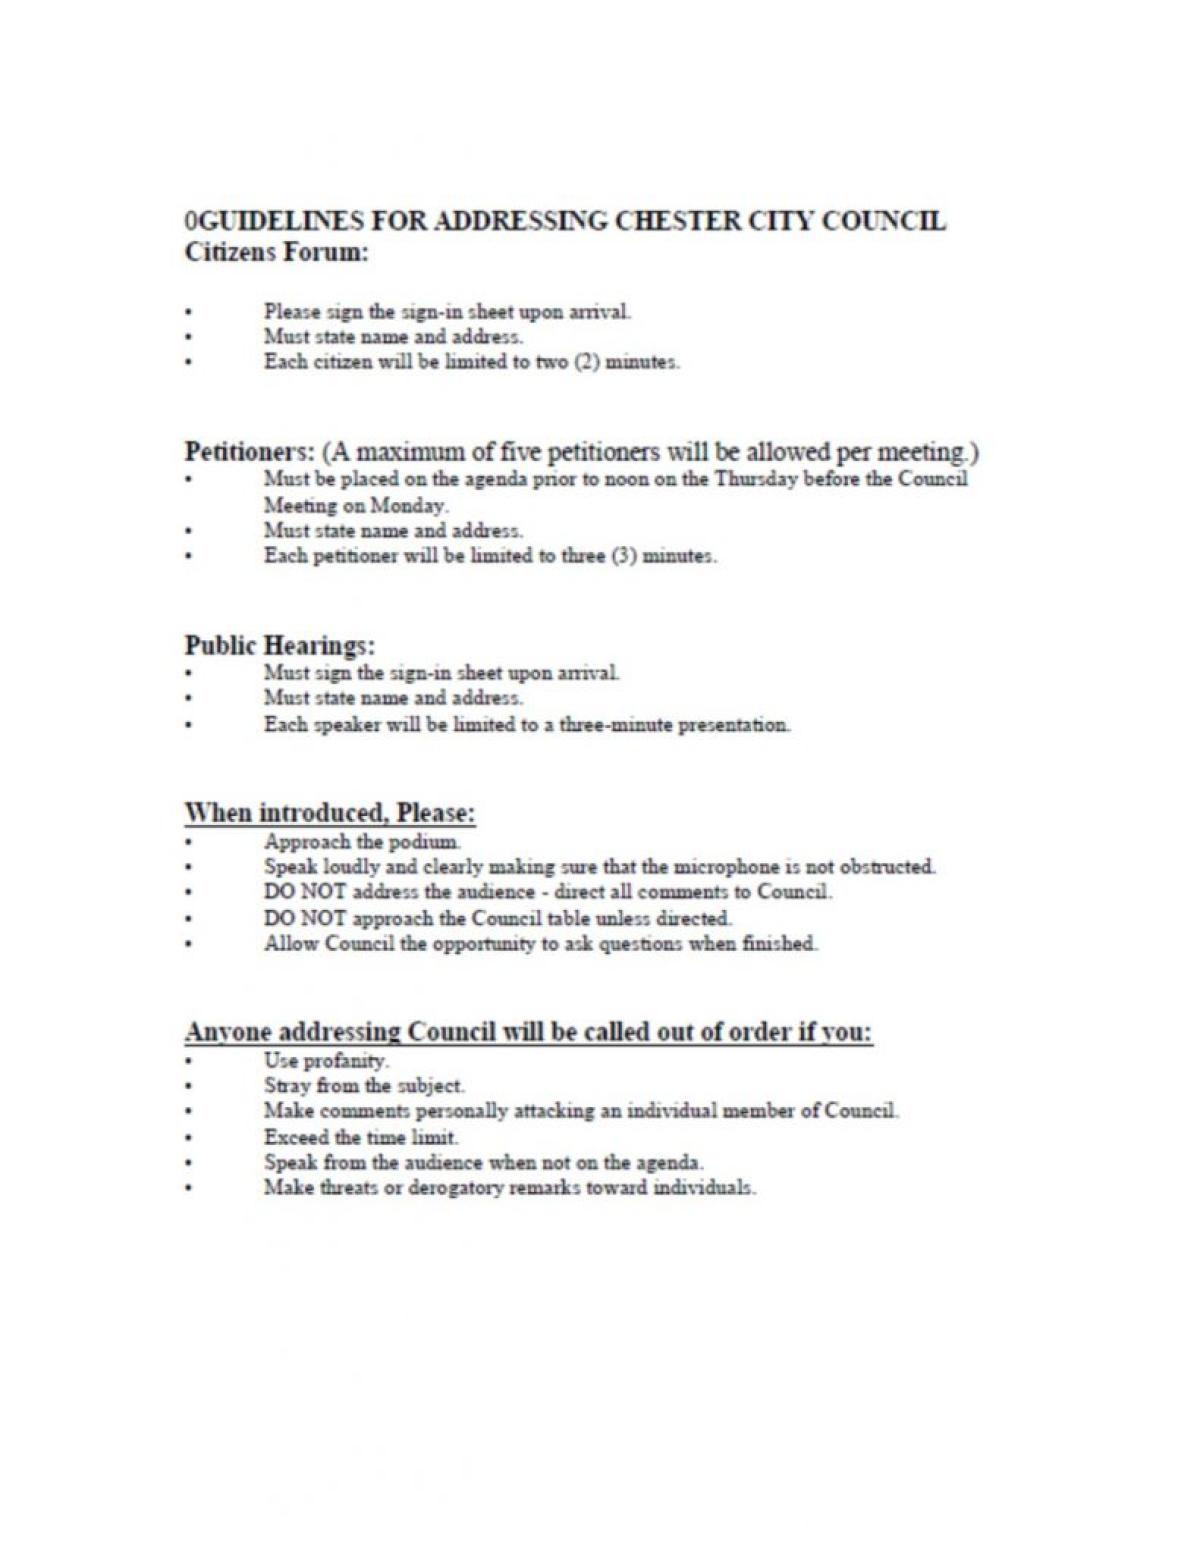 Guidelines for Addressing Chester City Council